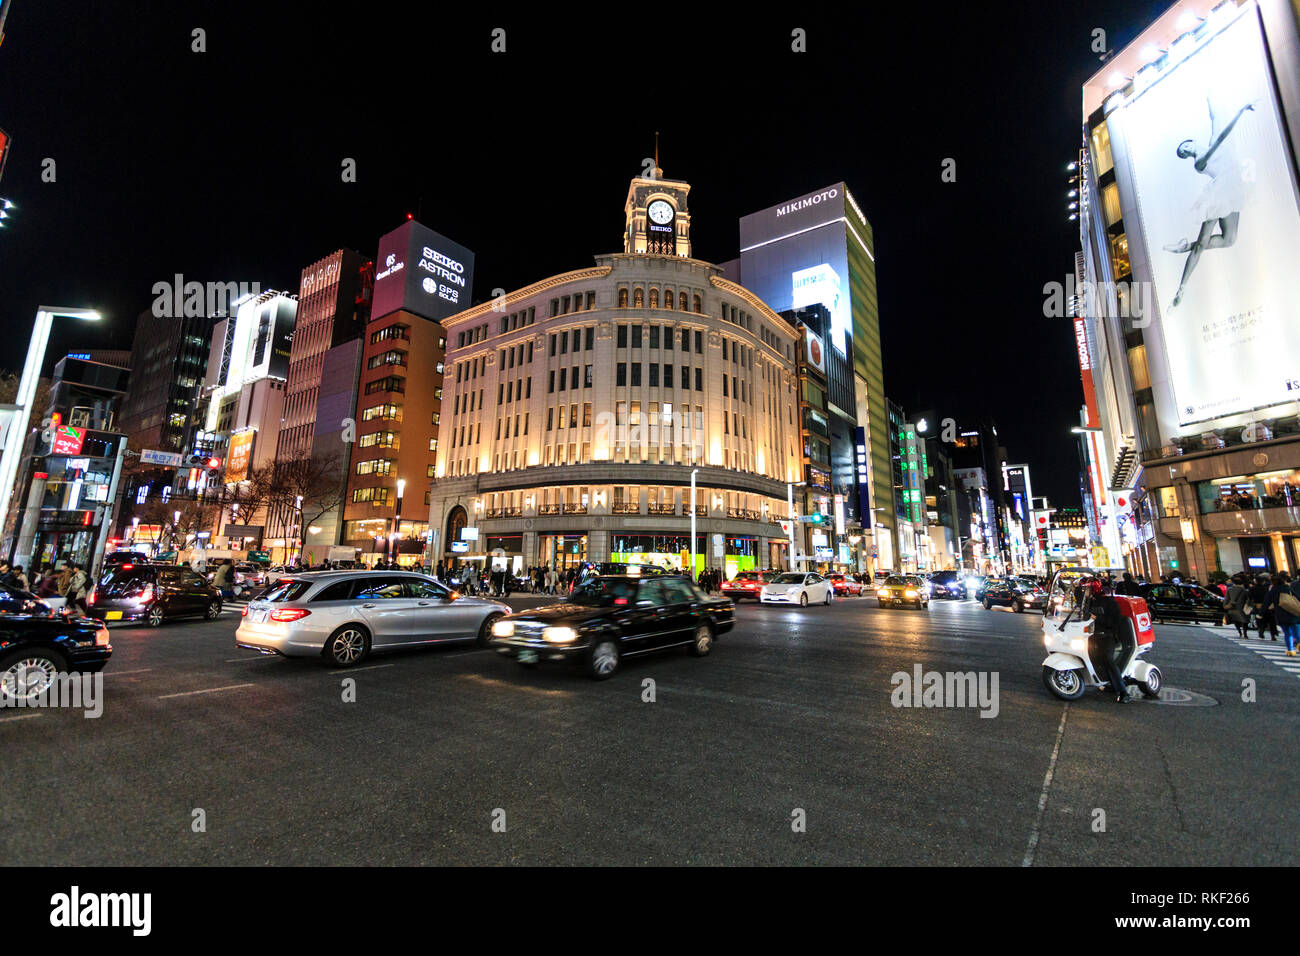 Tokyo, Ginza, night. 4-chome intersection with traffic and taxis passing by, motion blur, and in background the Wako Department store and others. Stock Photo